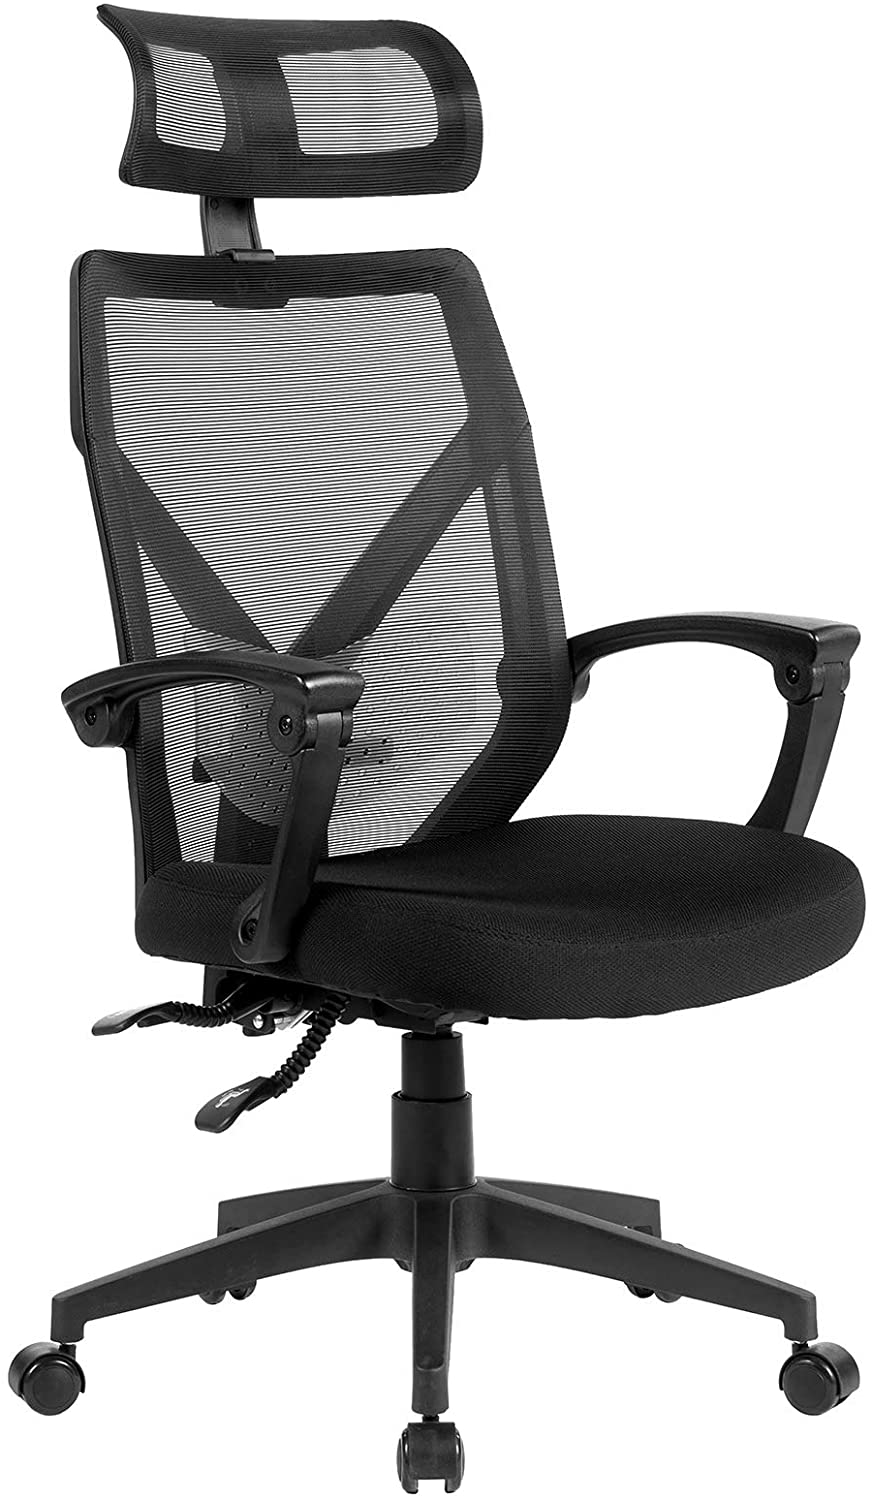 UNICOO - Home Office Chair Ergonomic Desk Chair High-Back Mesh Computer Chair Lumbar Support Comfortable Executive Adjustable Rolling Swivel Task Chair with Armrests (W-203C - Black)